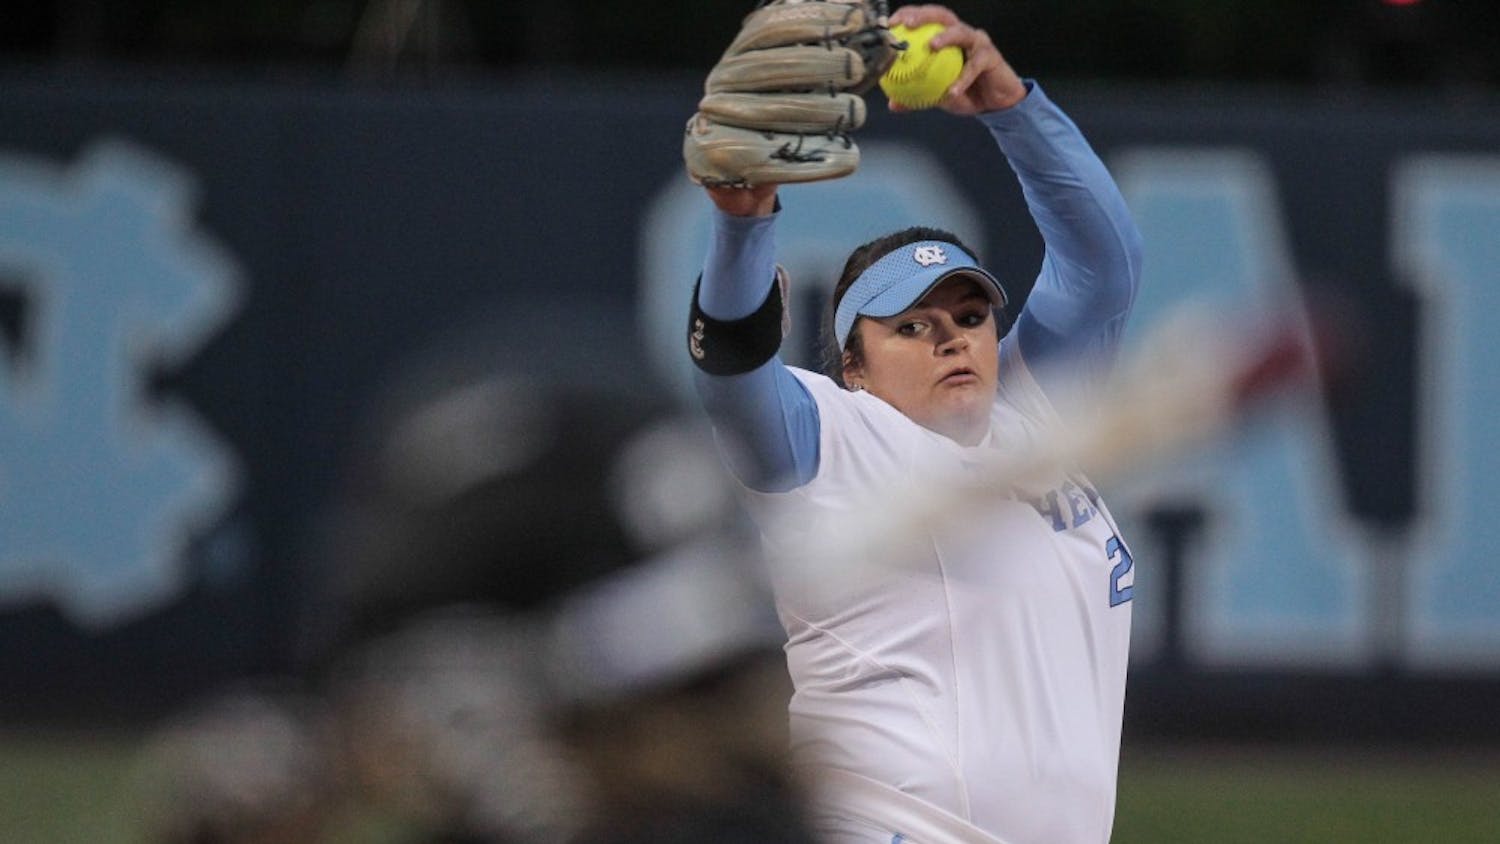 Brittany Pickett (28) throws a pitch during Game 3 against NC State on Monday, April 16.